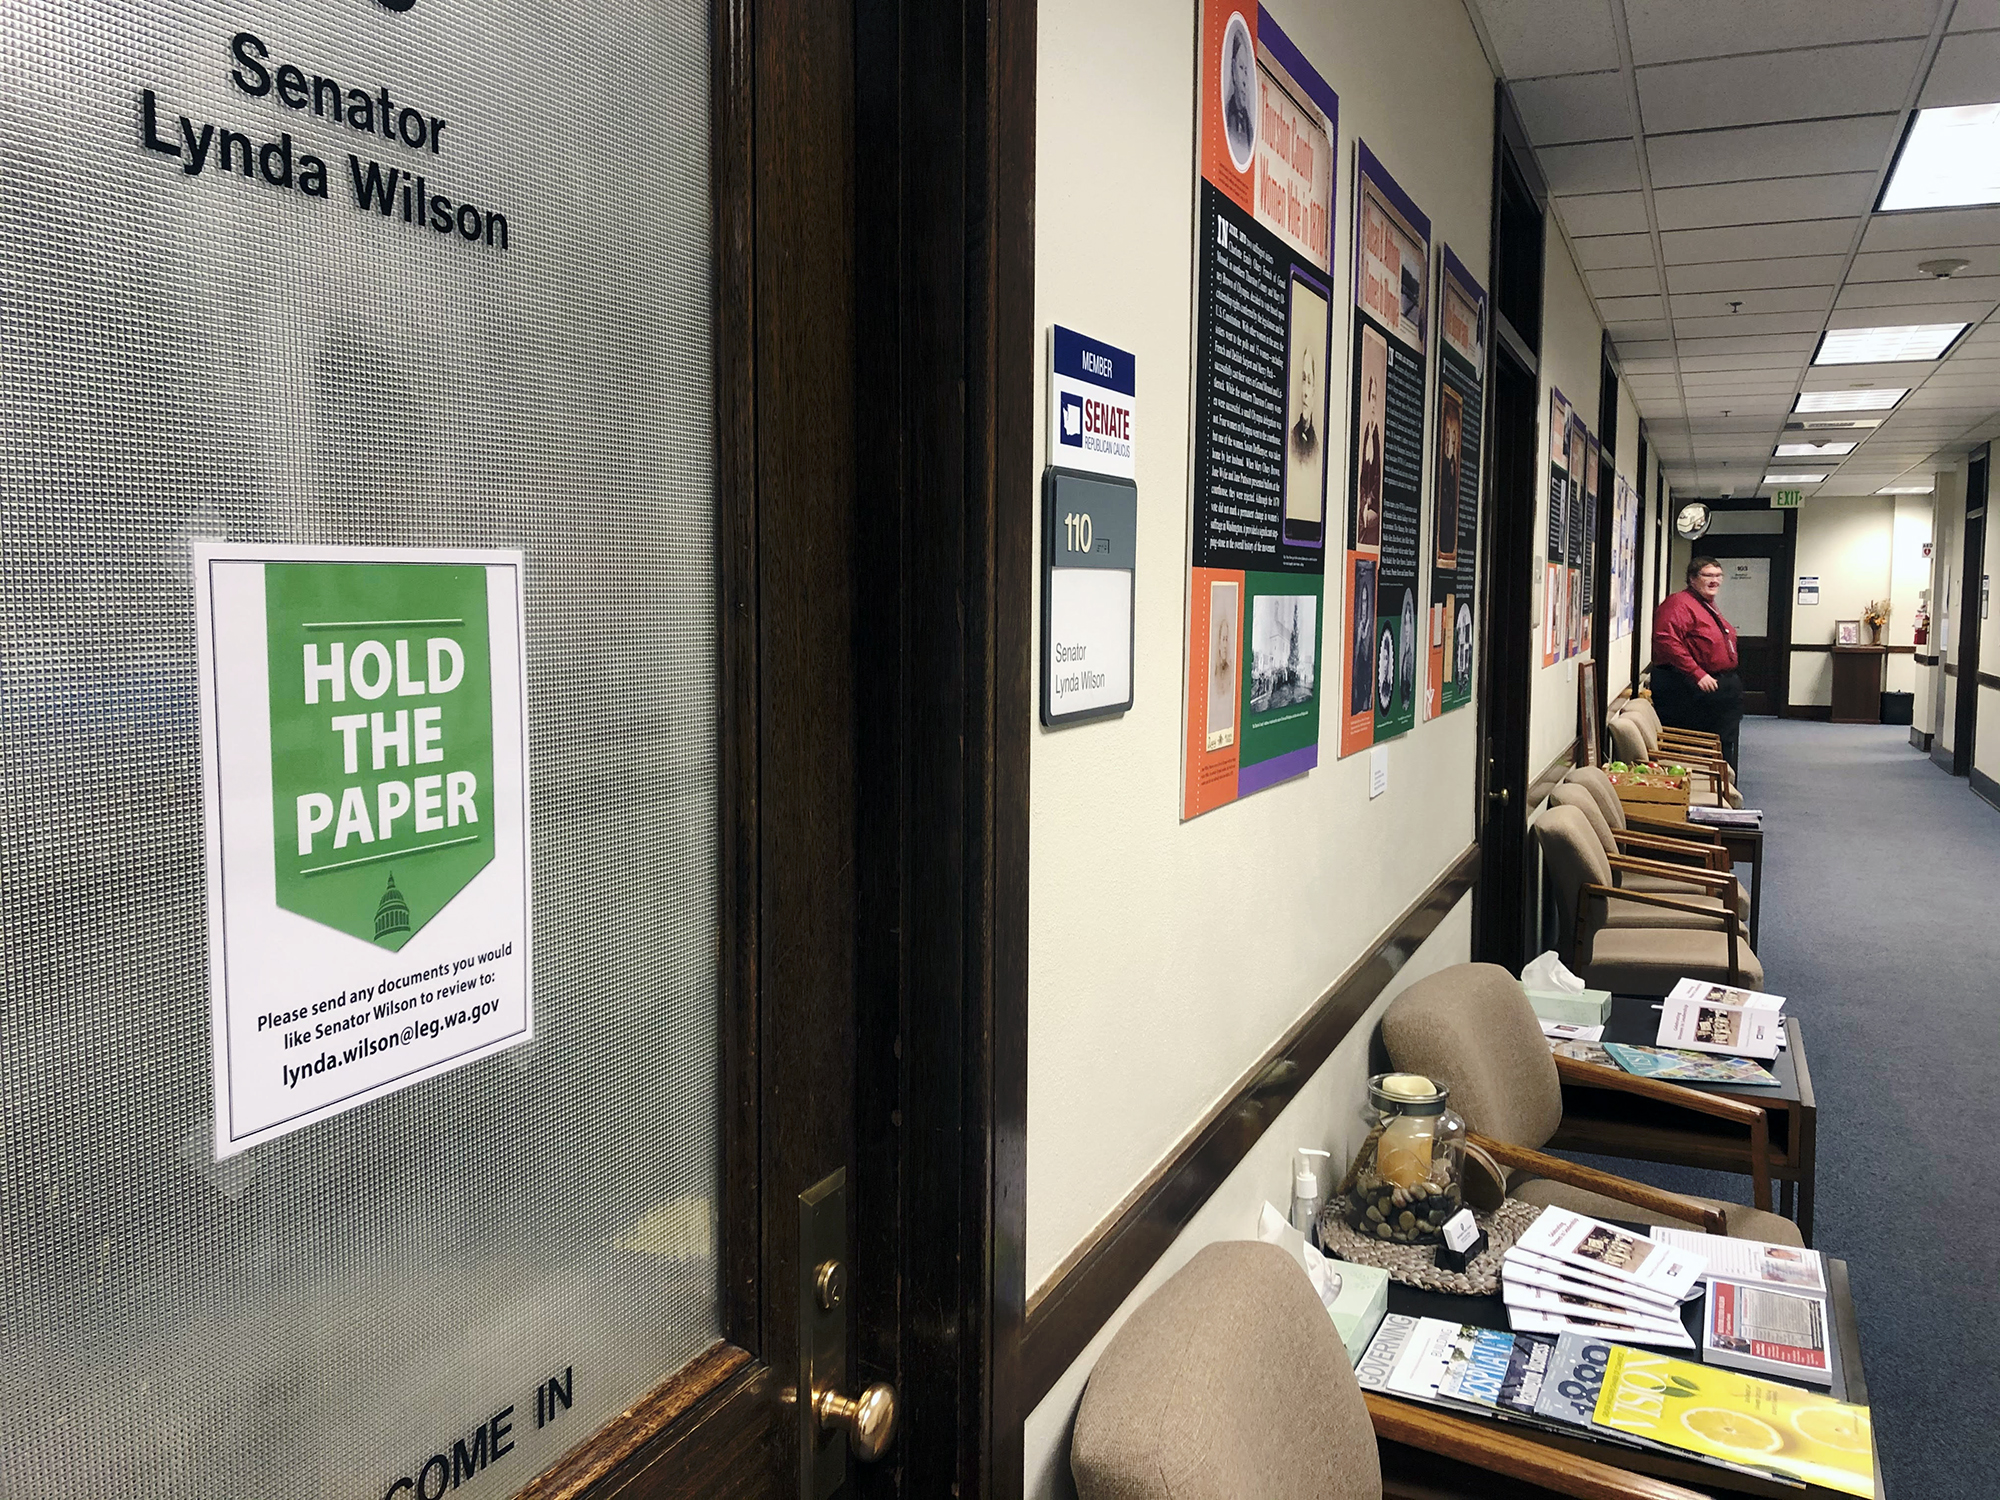 A door to a state senator's office.